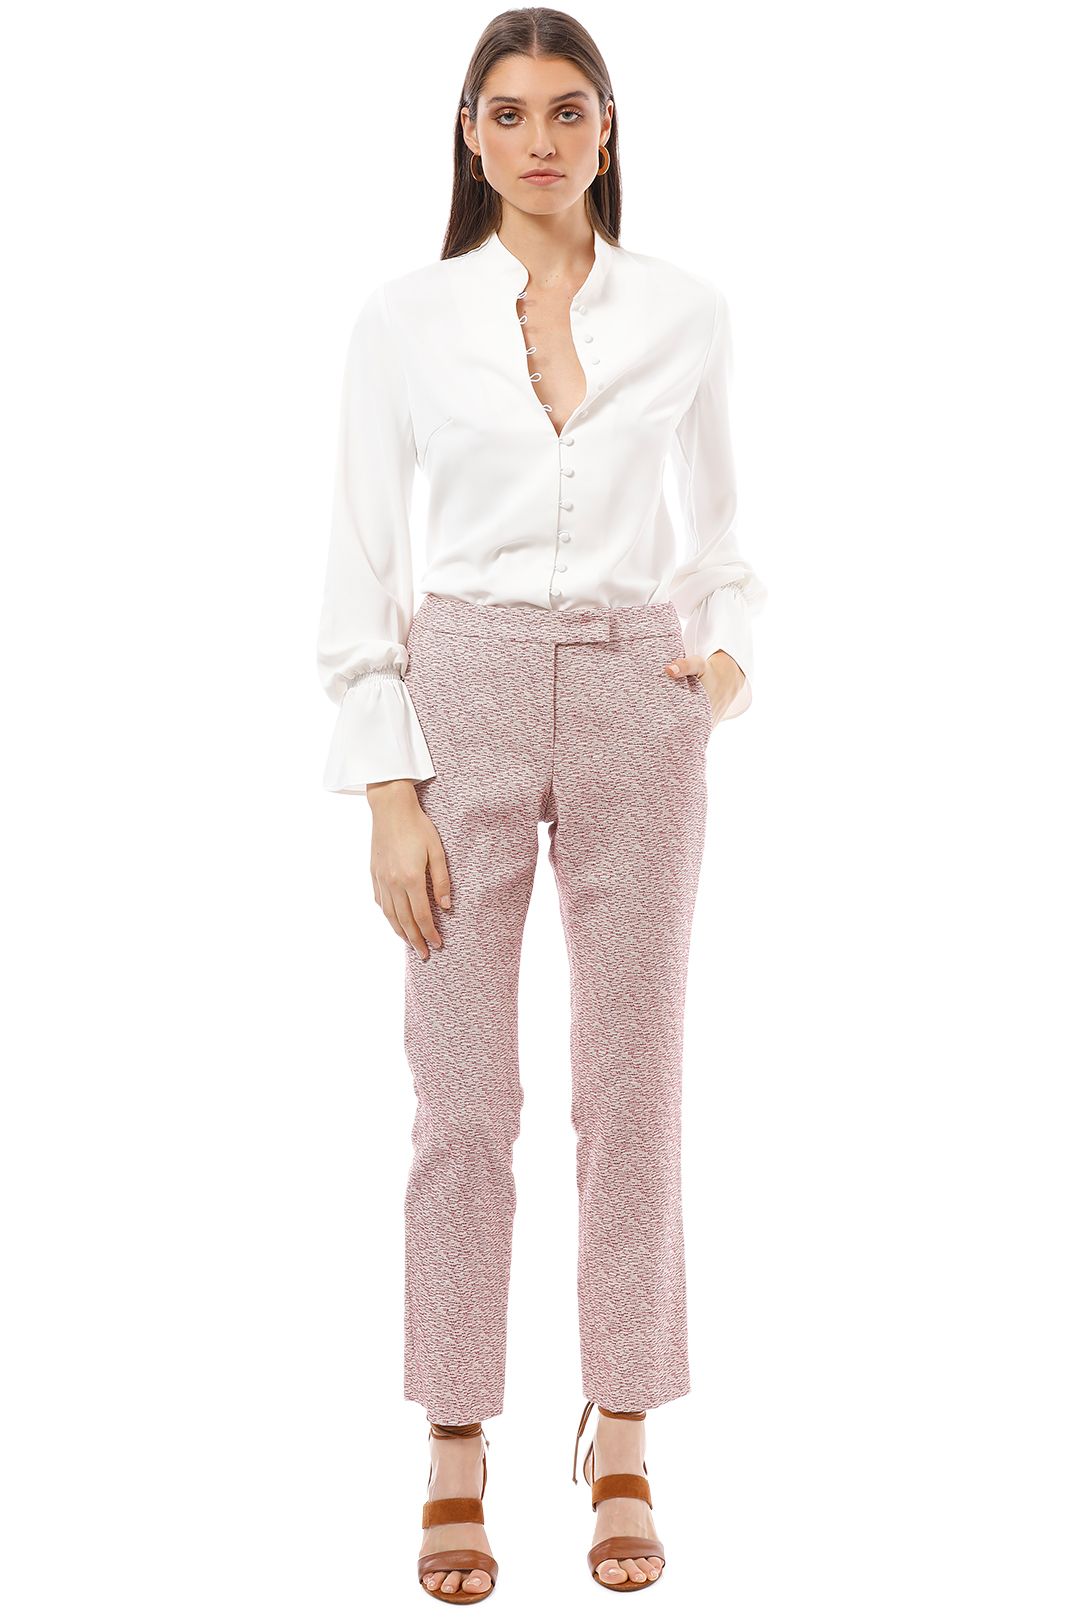 Max and Co - Carezza Pants - Pink - Front